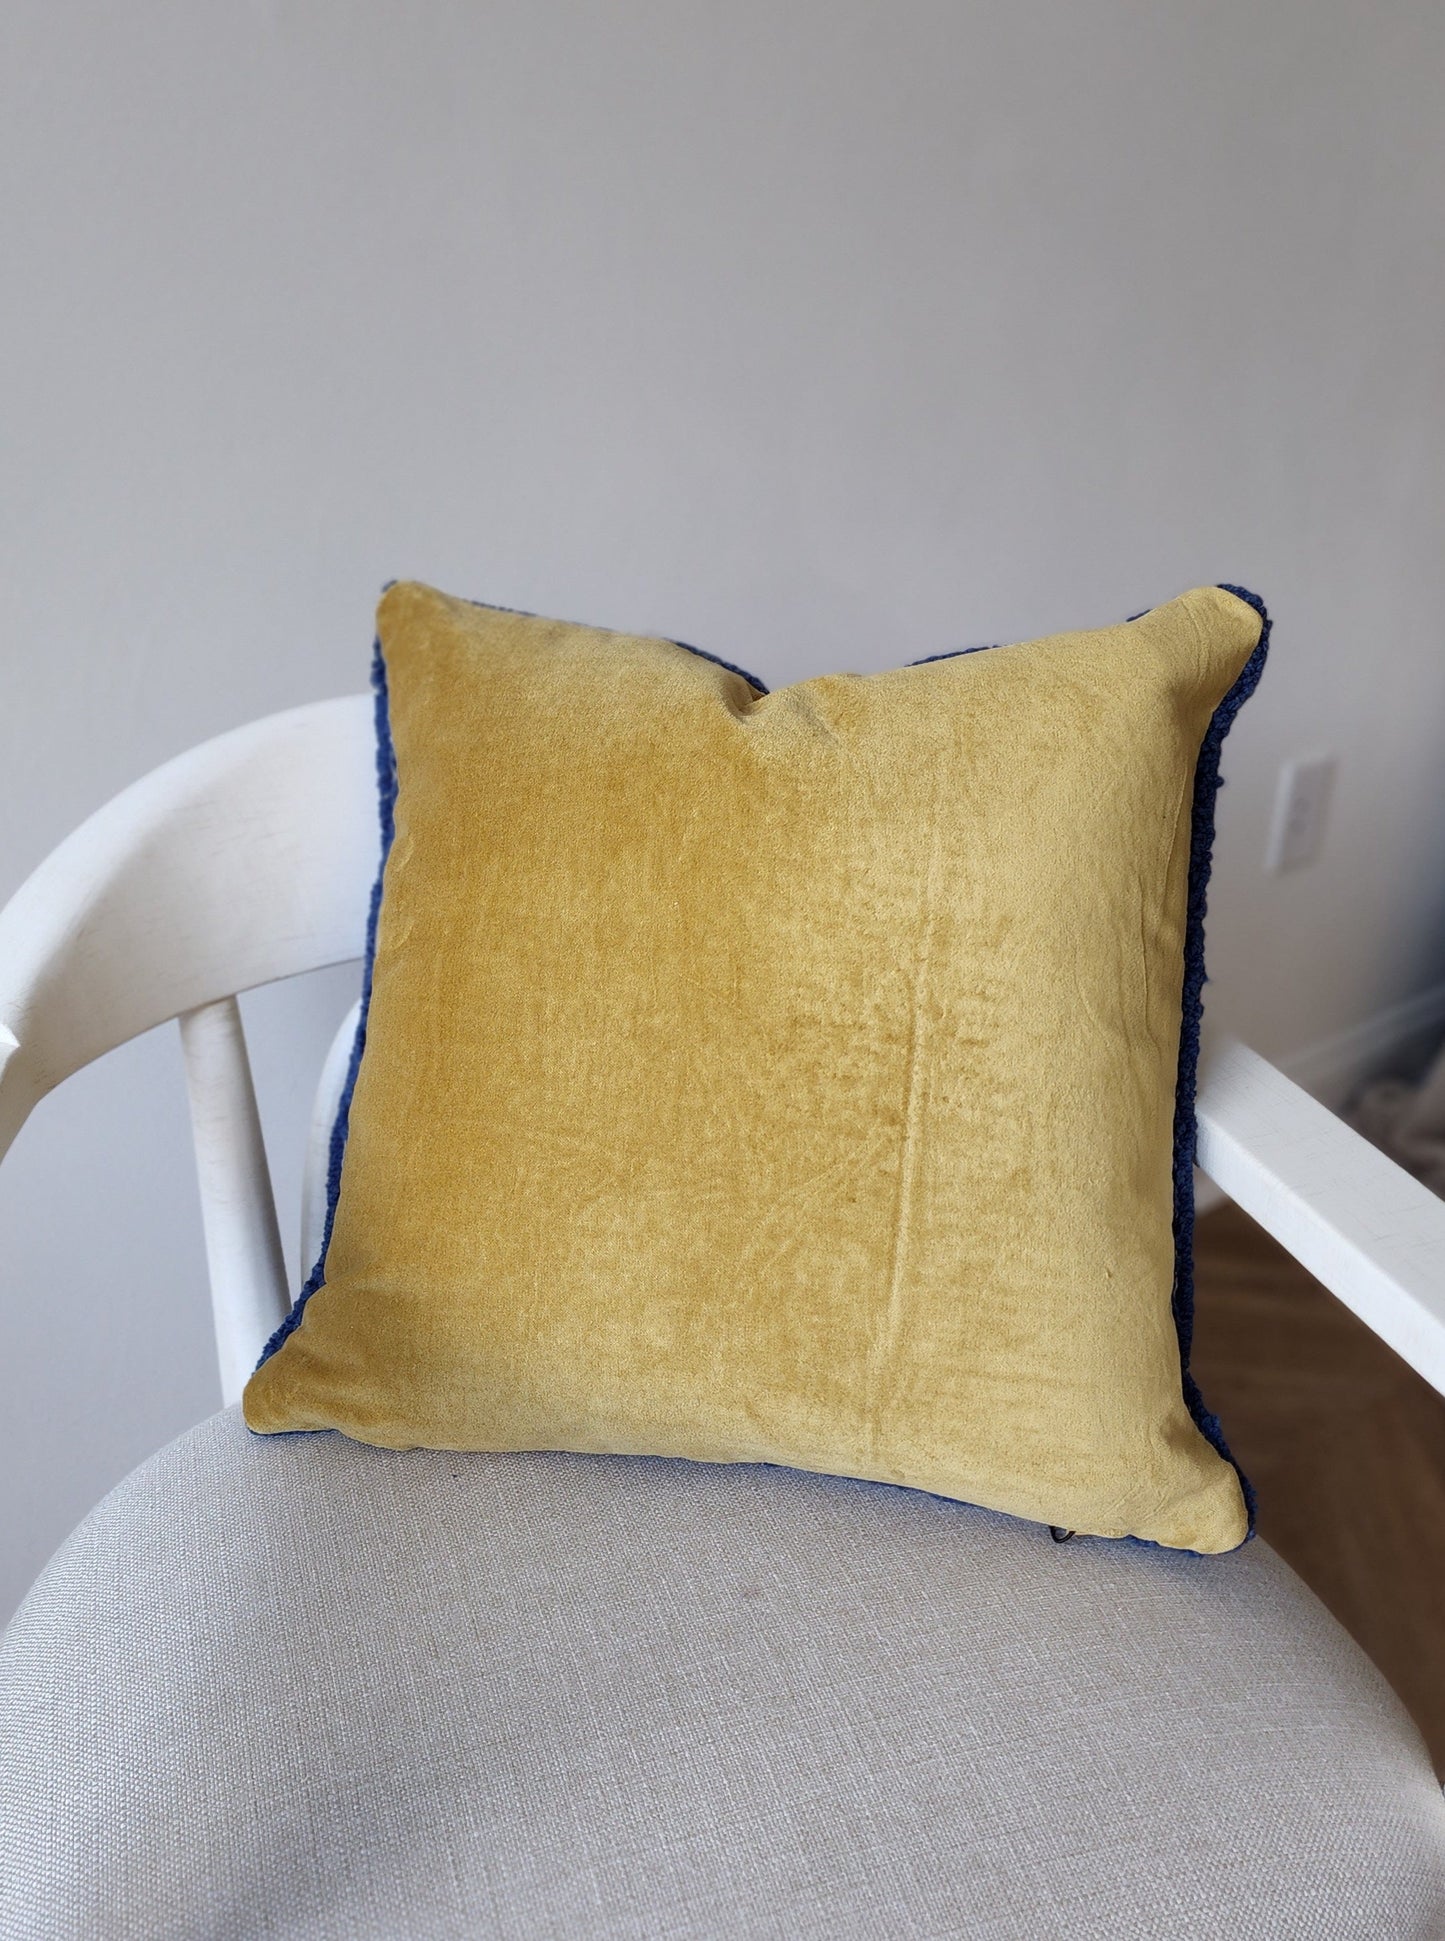 Groovy Cotton Punch Needle Pillow - Blue and Mustard